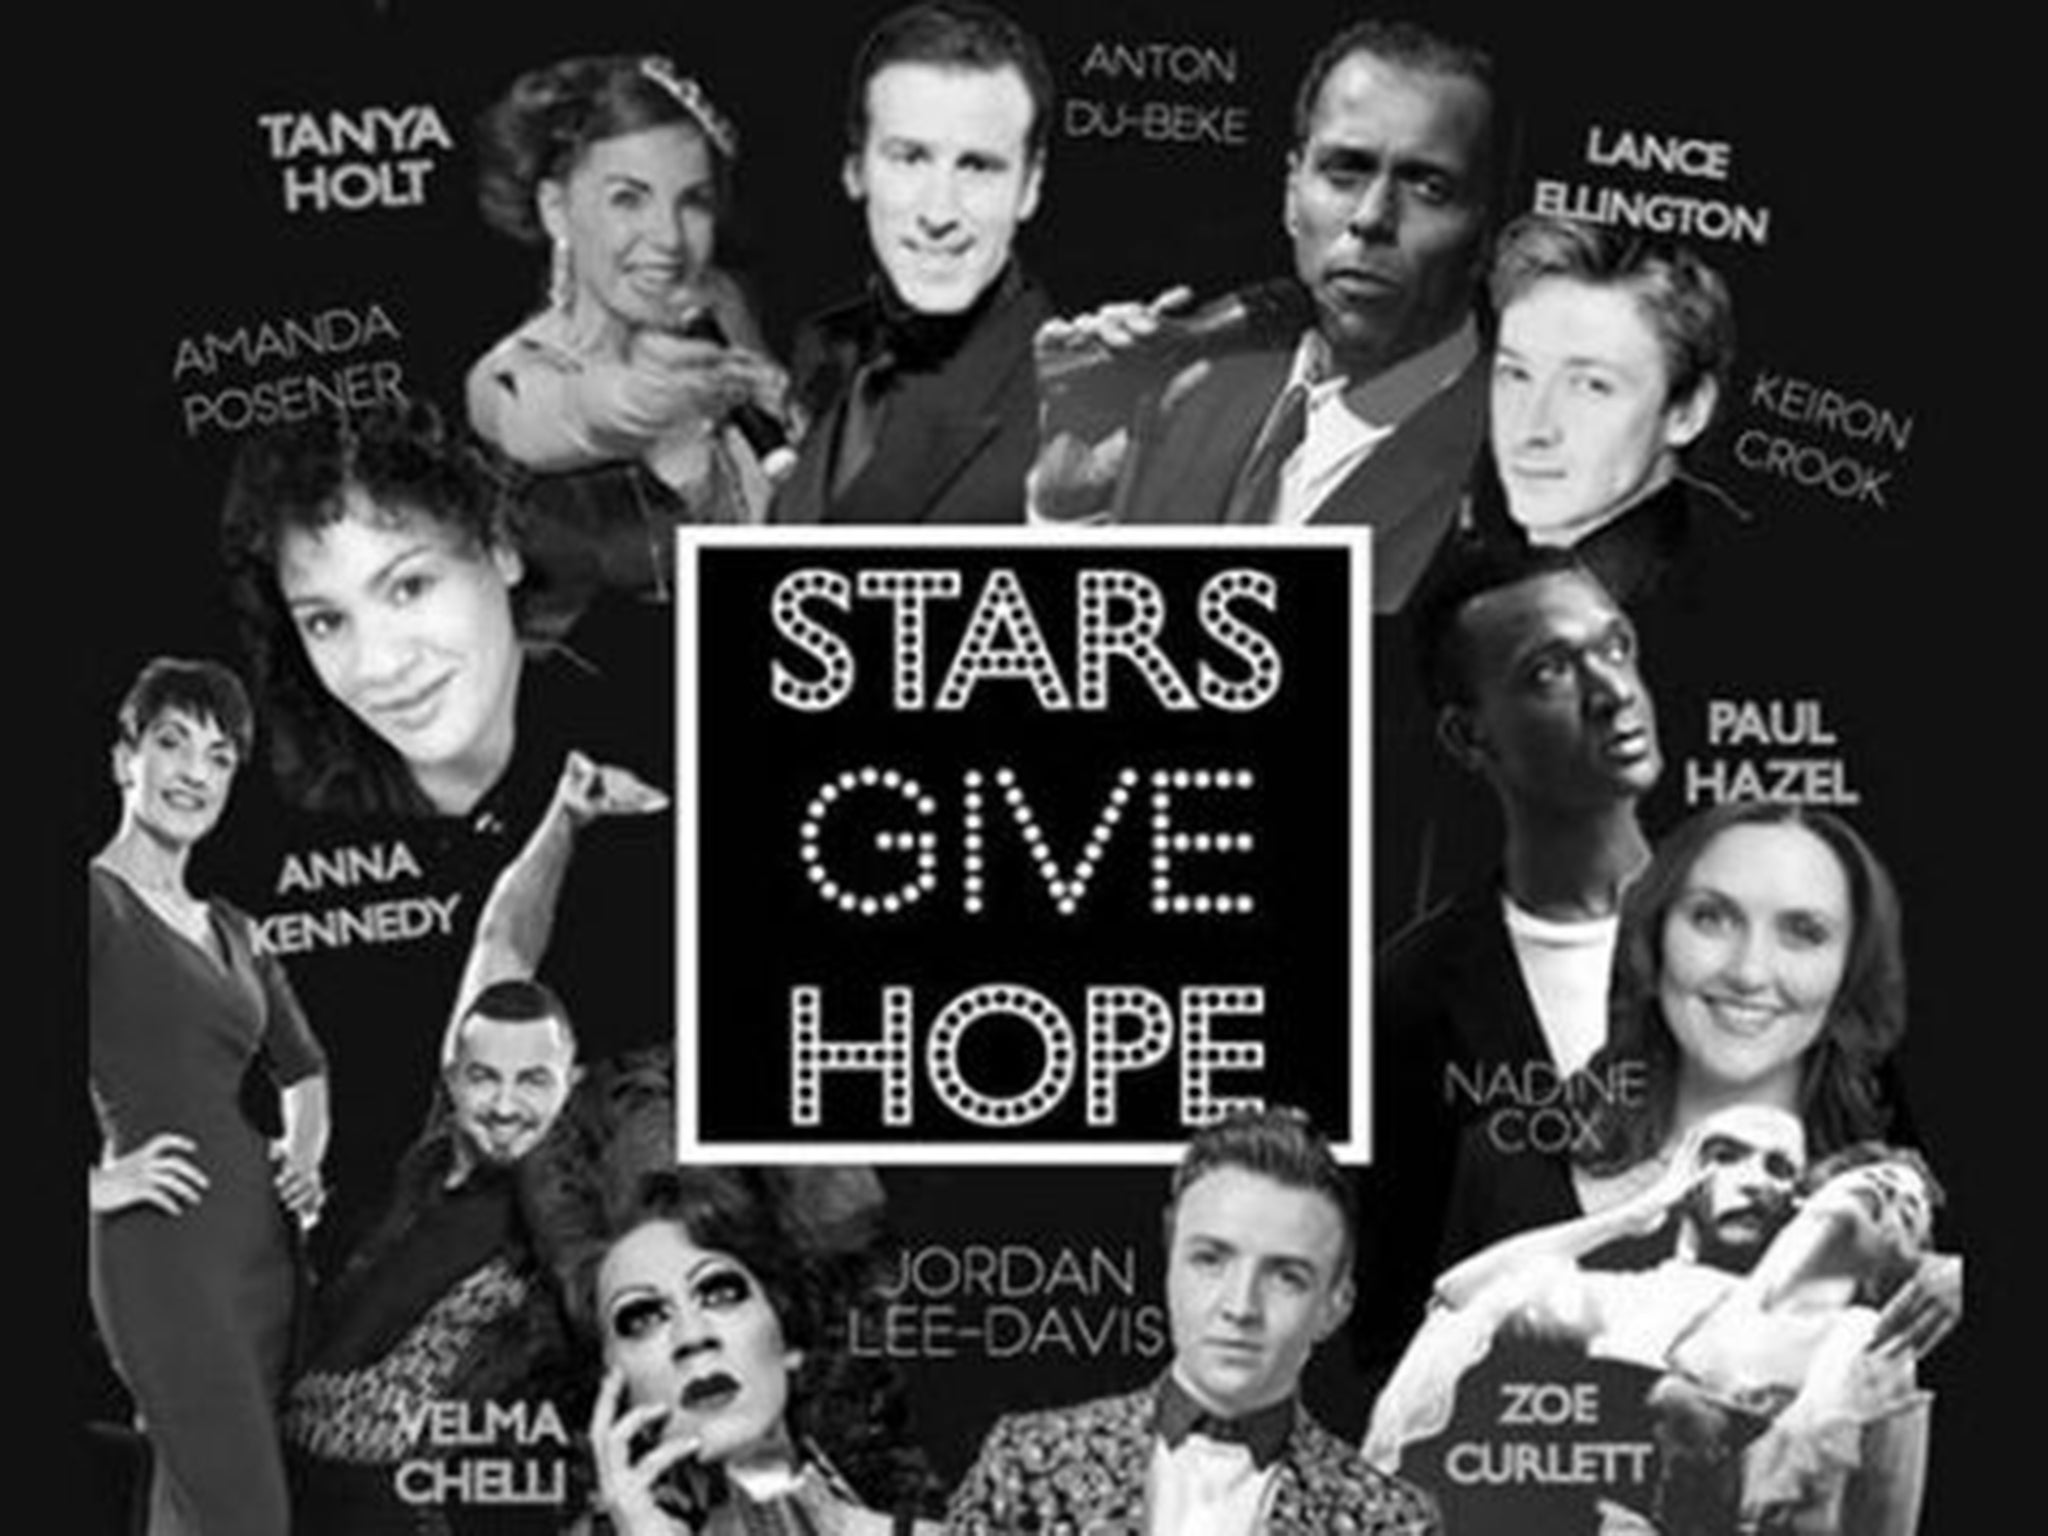 For the first time, Stars Give Hope will be held in the West End of London, with the management of the Hippodrome allowing fundraiser Greta Lee to stage the show there free of charge